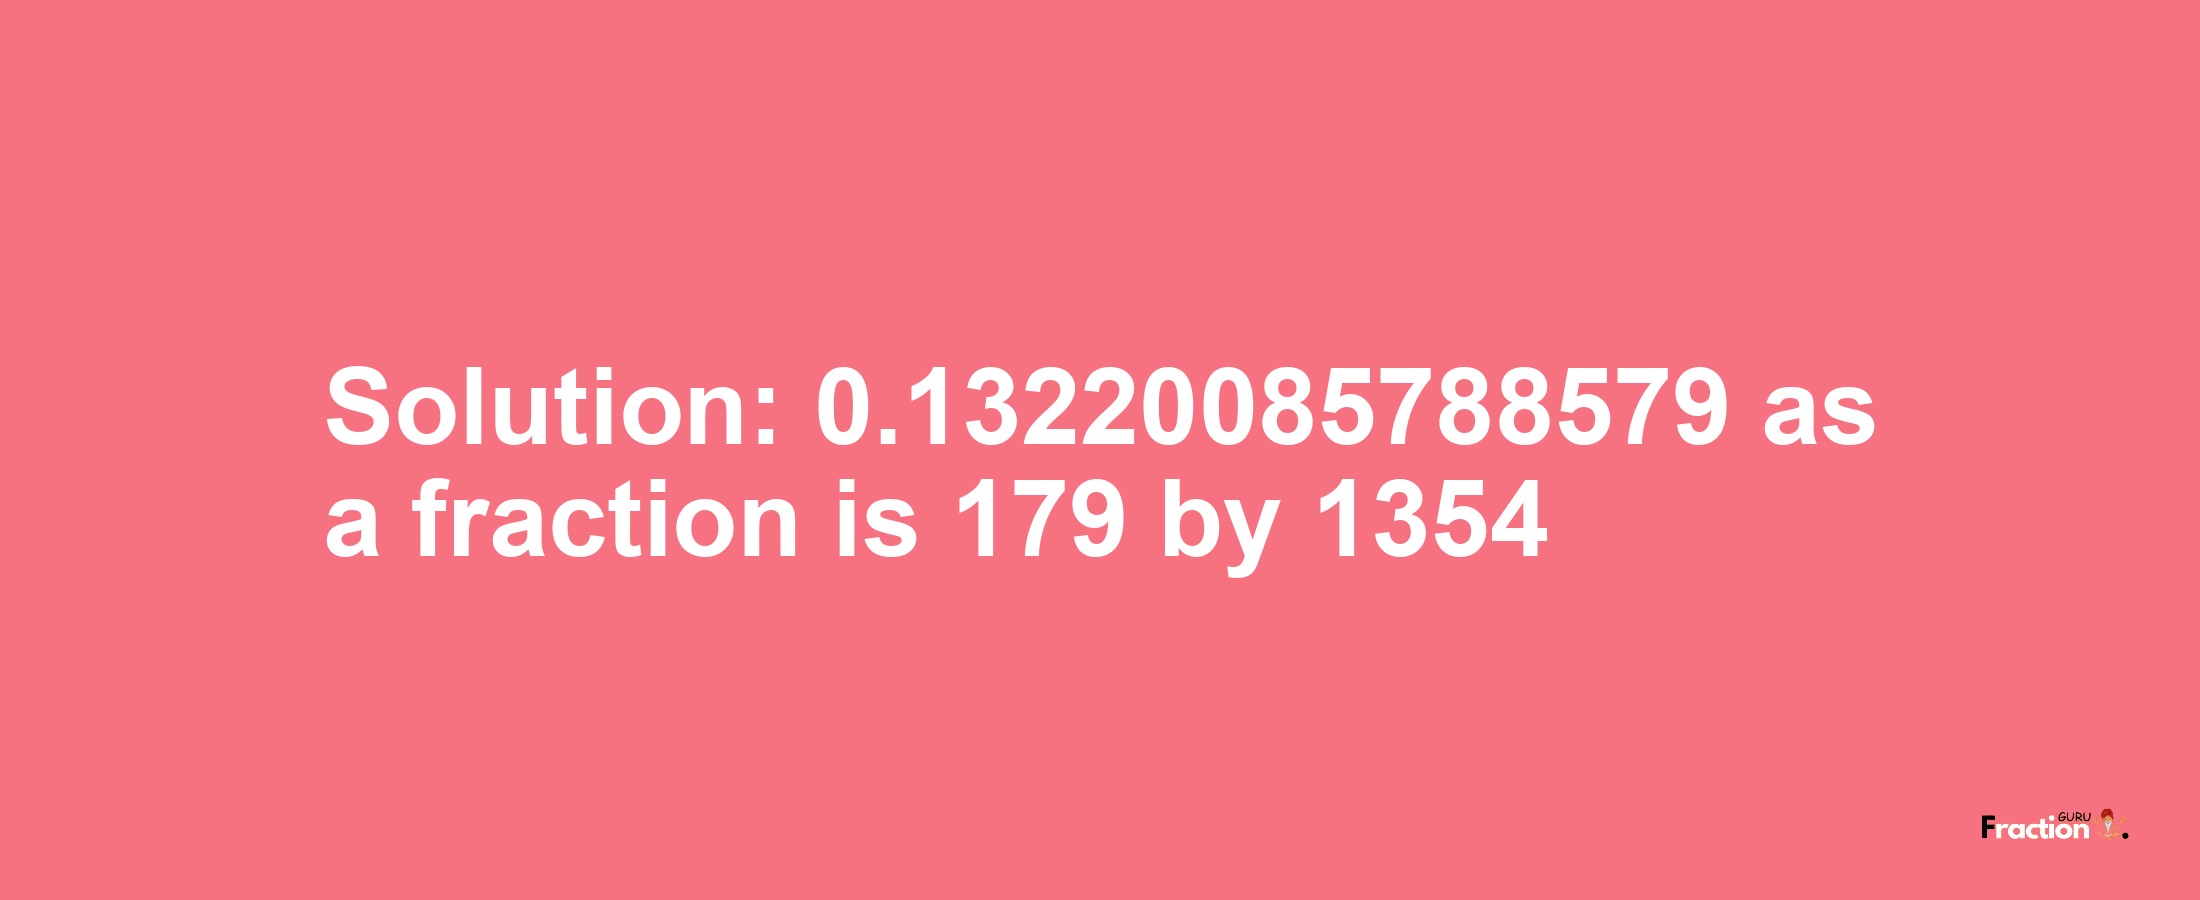 Solution:0.13220085788579 as a fraction is 179/1354